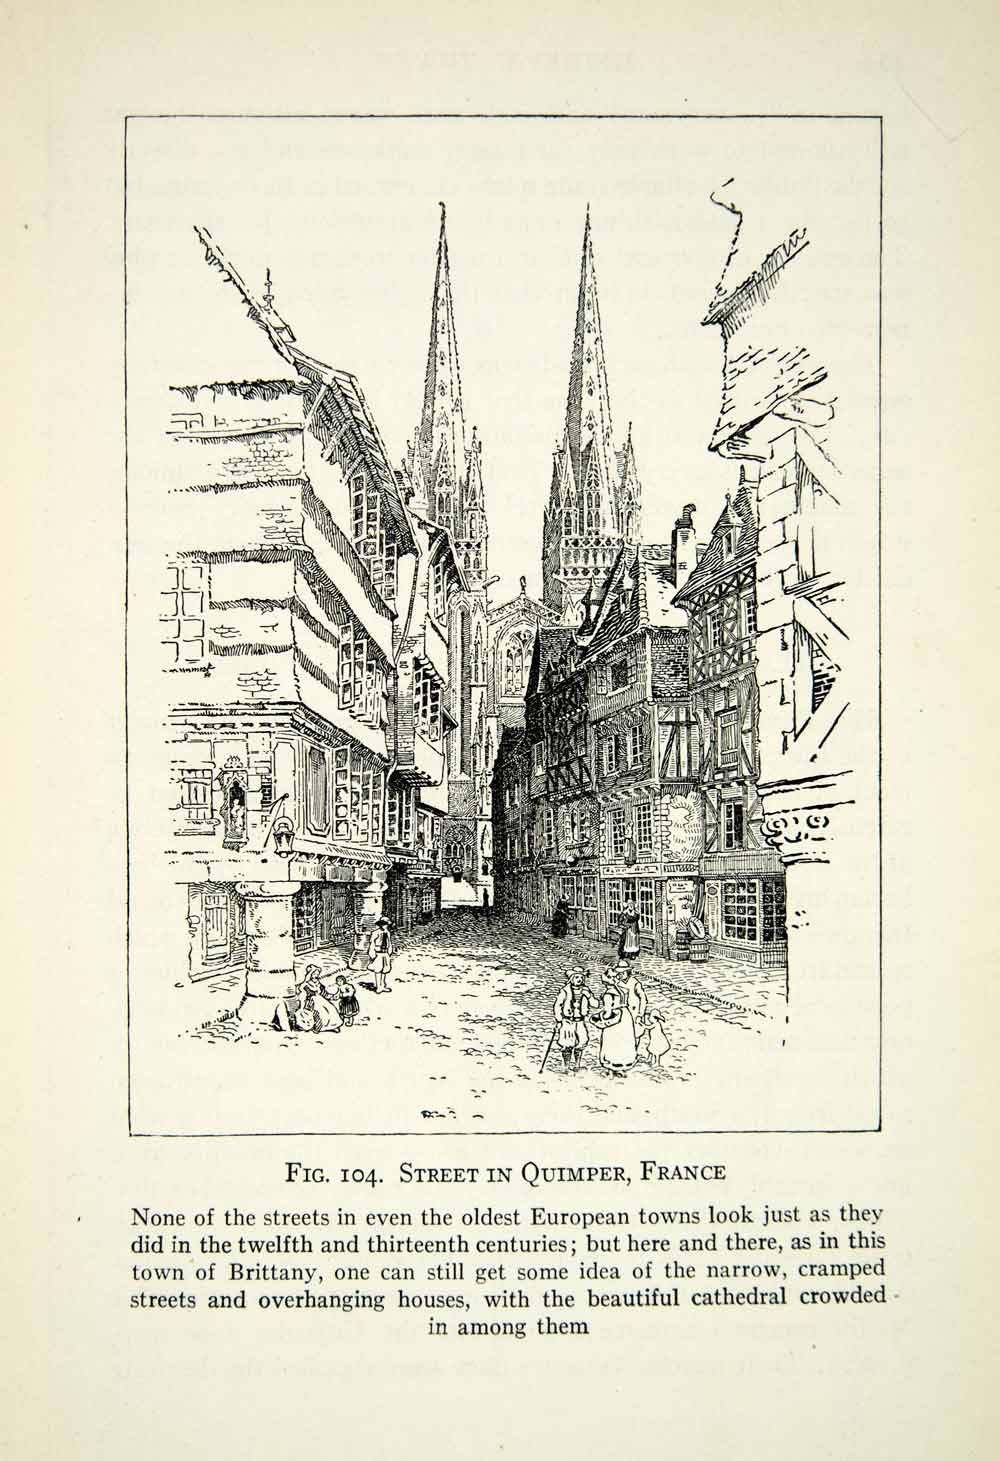 1929 Print Quimper France Streetscape Cityscape Art Gothic Cathedral XEBA9